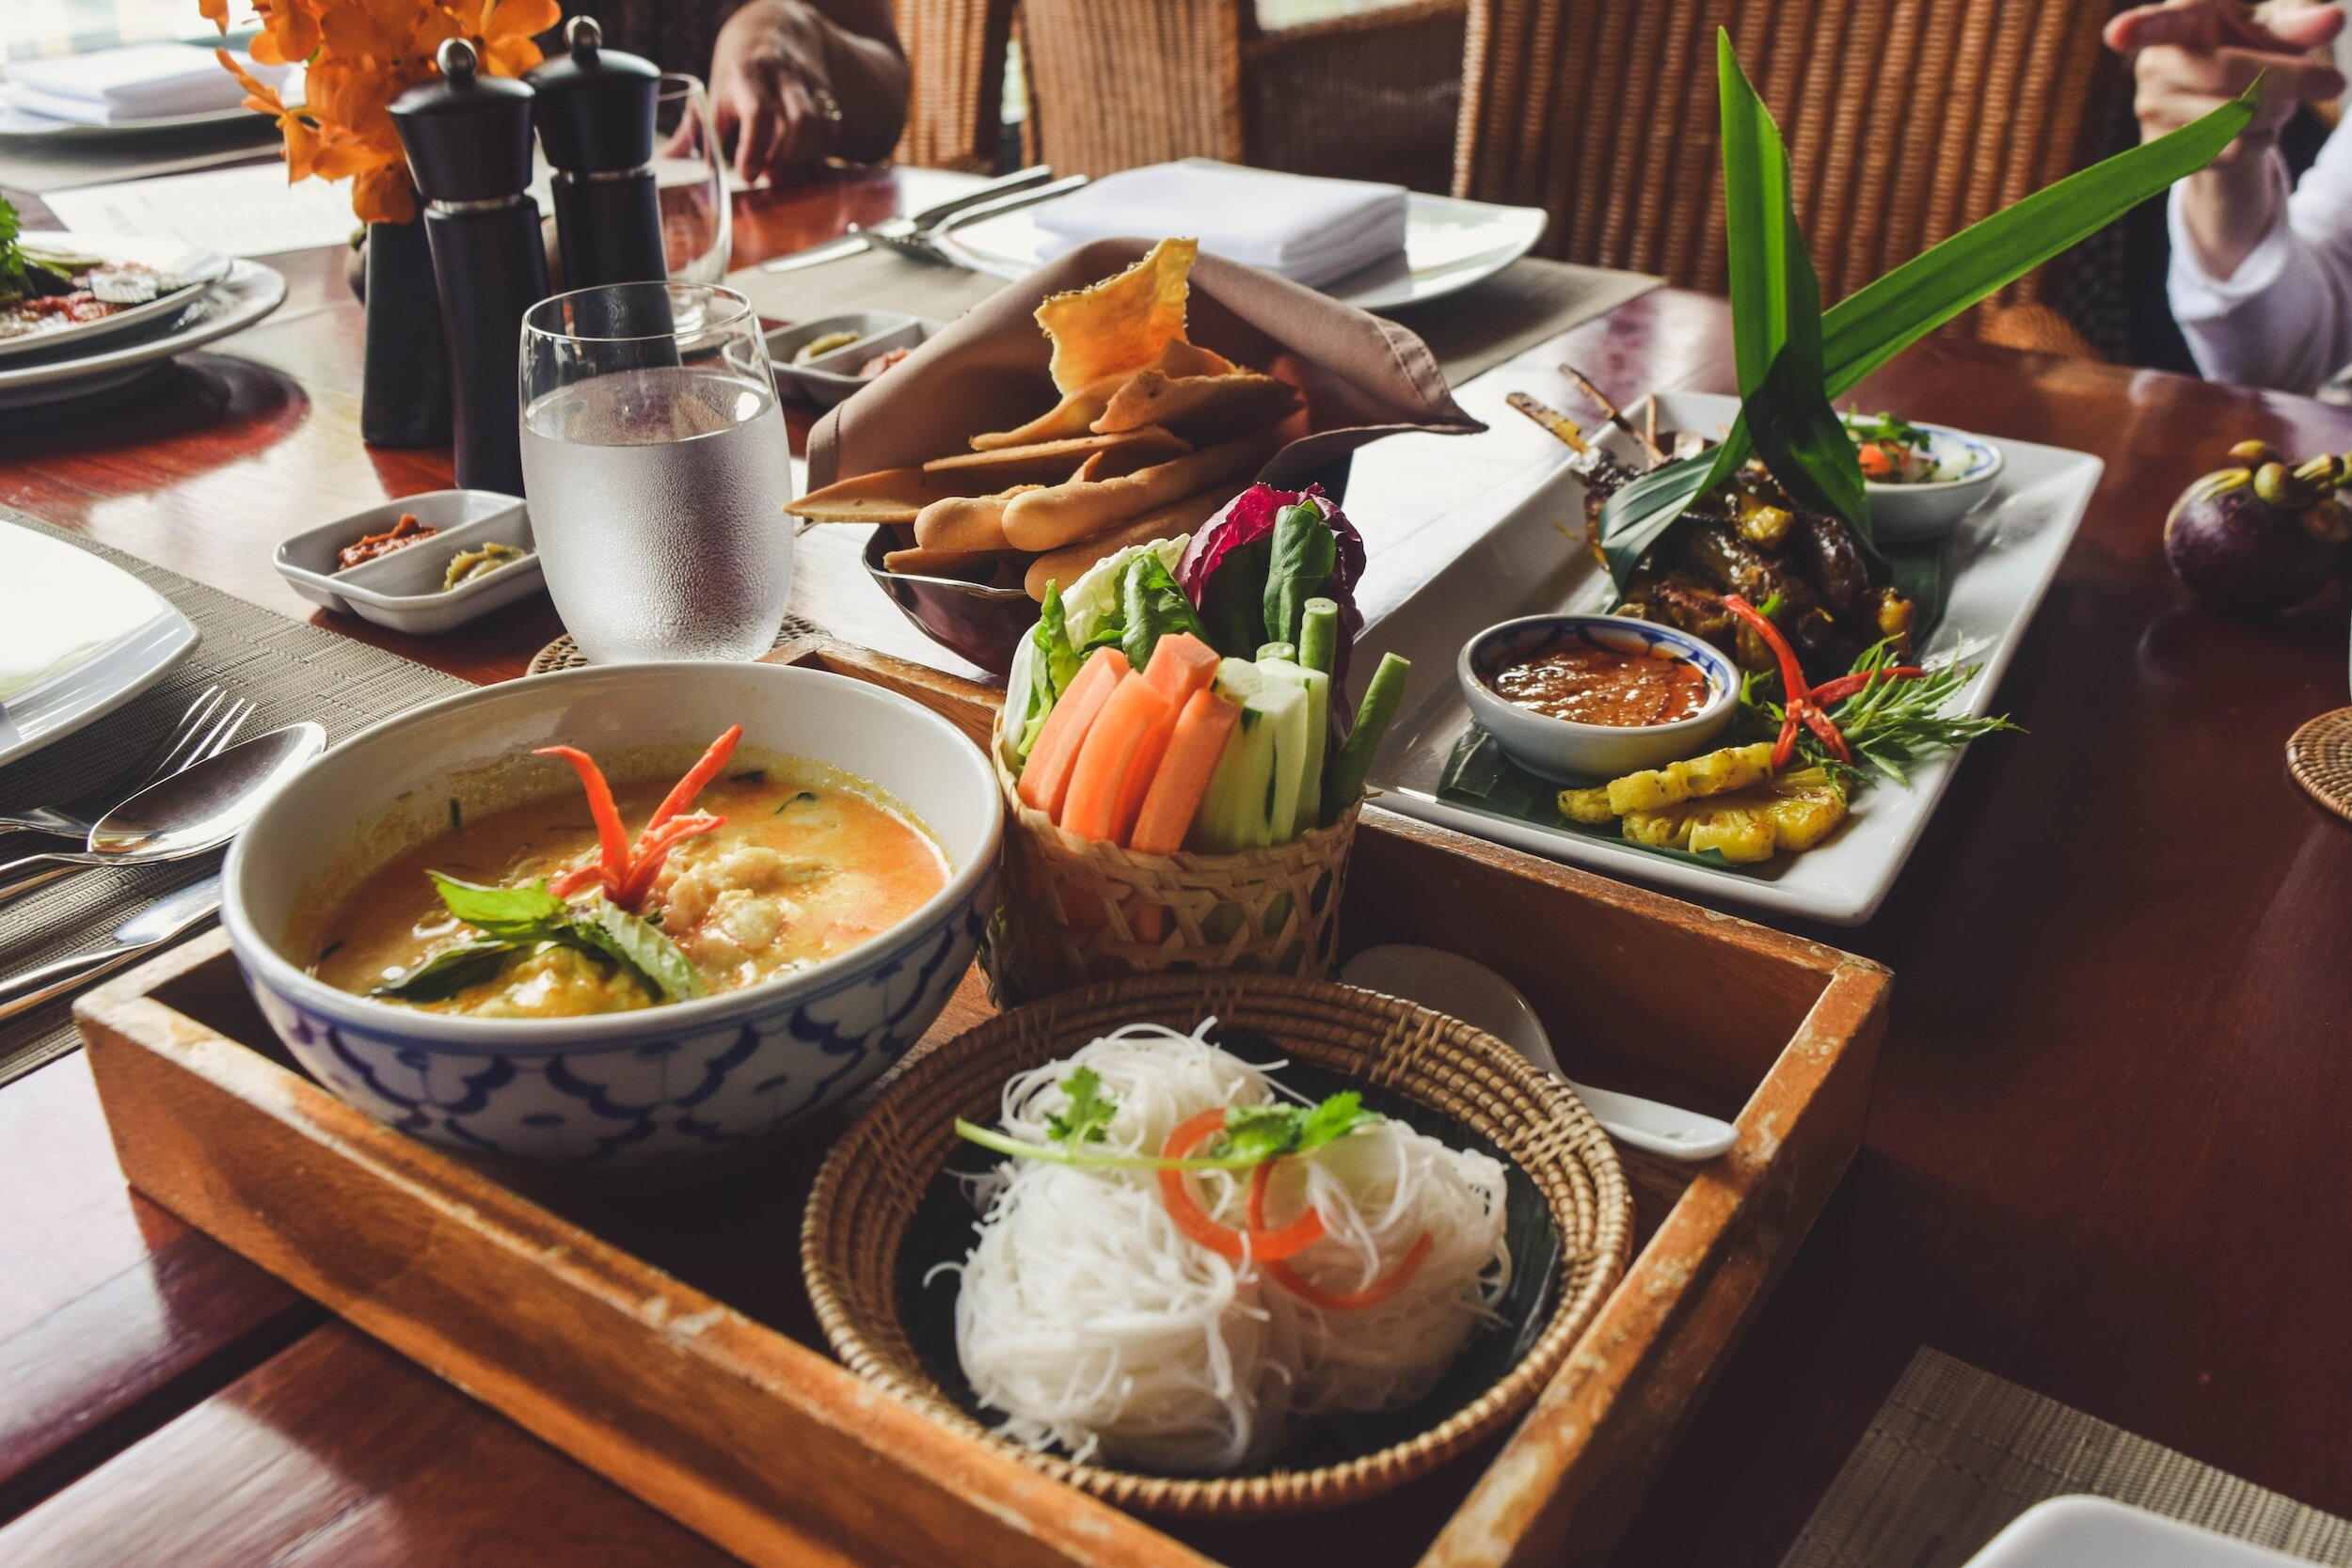 A selection of Thai delicacies, including a soup that balances sweet, sour and savoury, sate and more